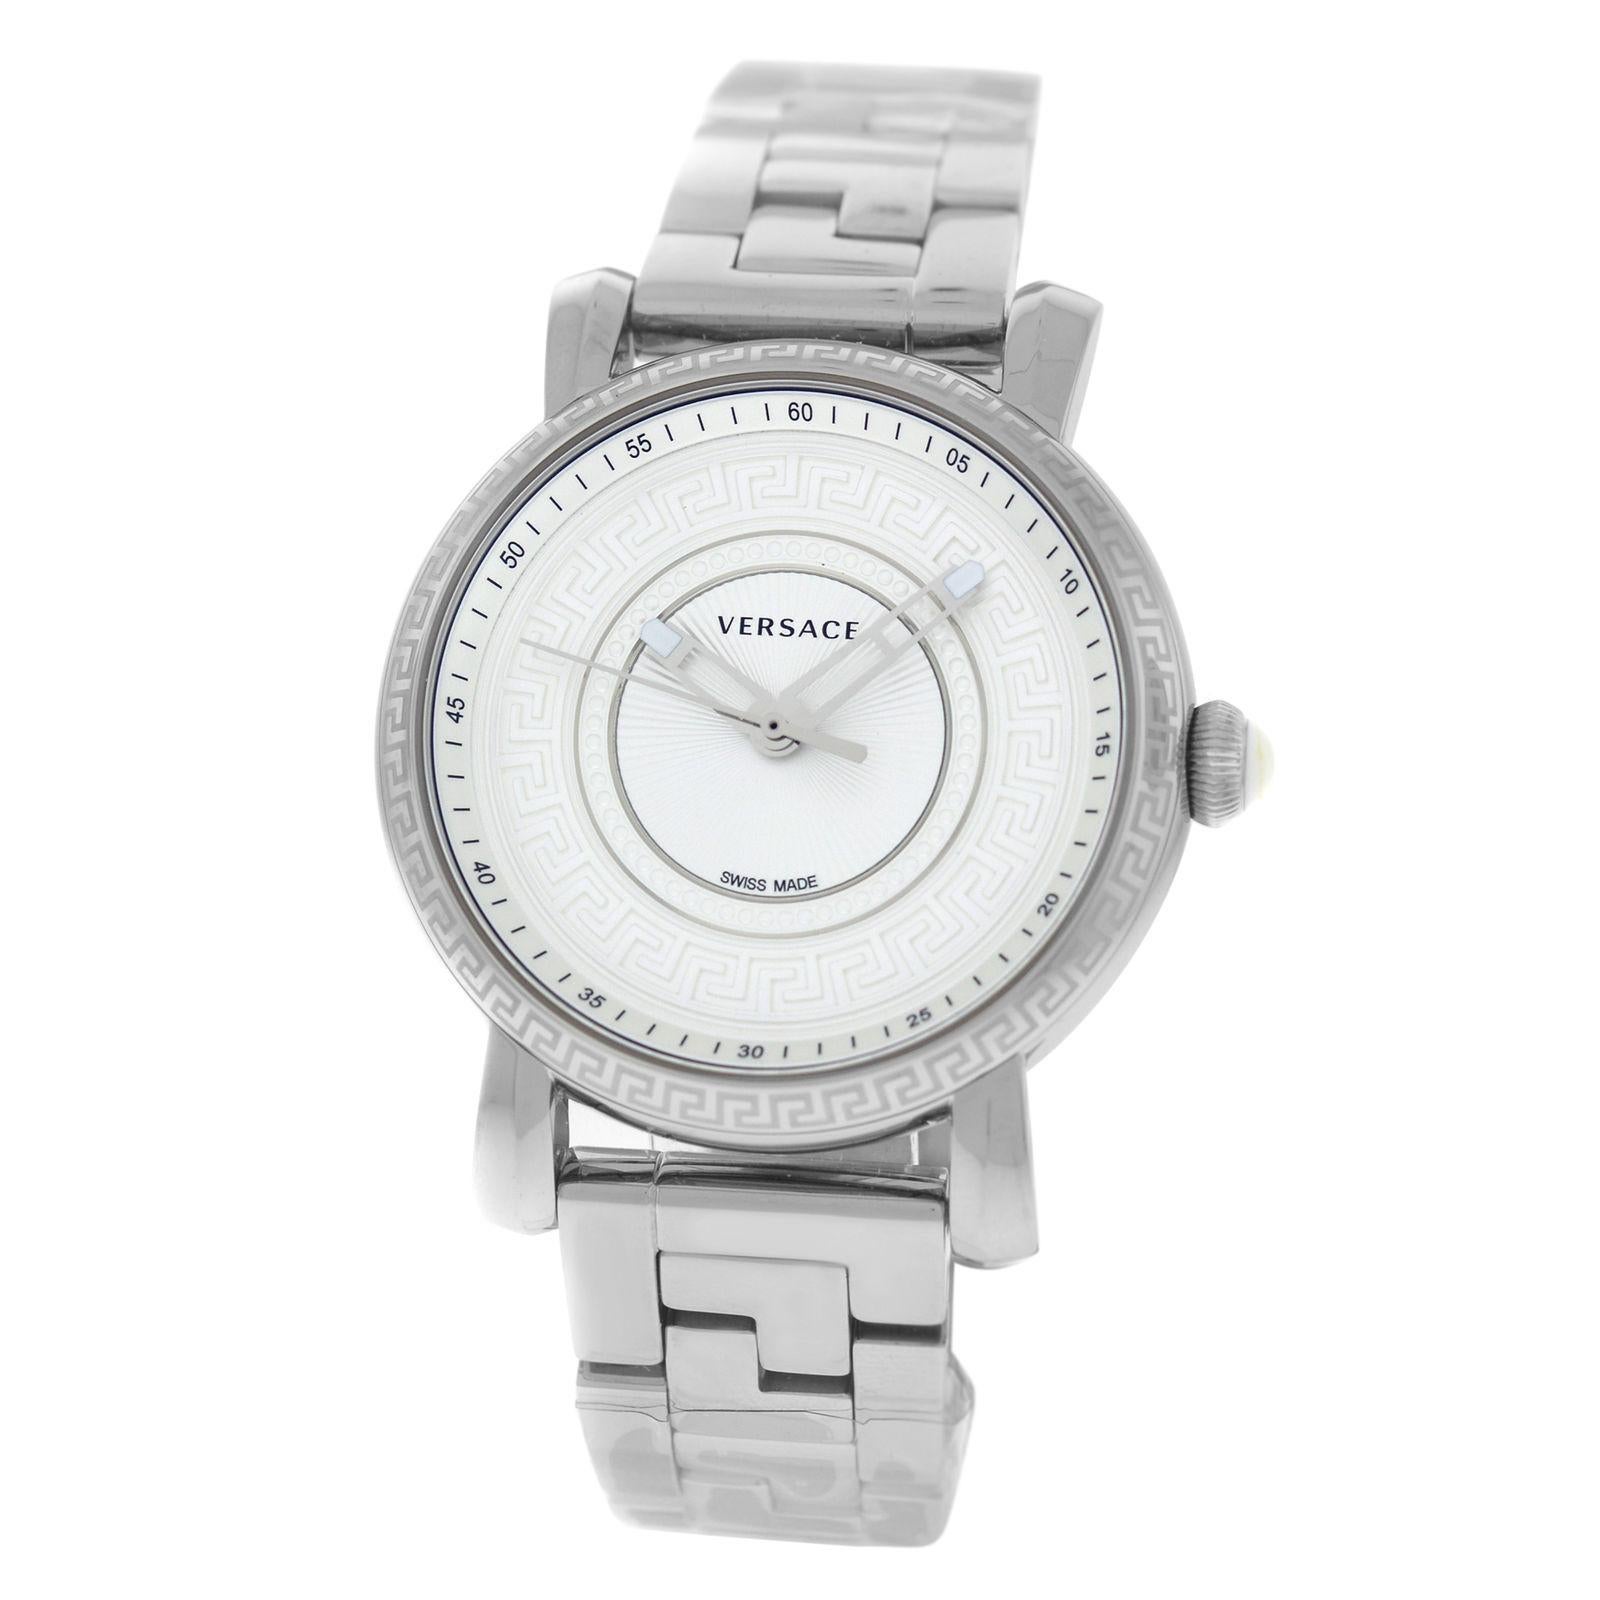 Authentic New Versace Day Glam Stainless Steel Quartz Watch For Sale